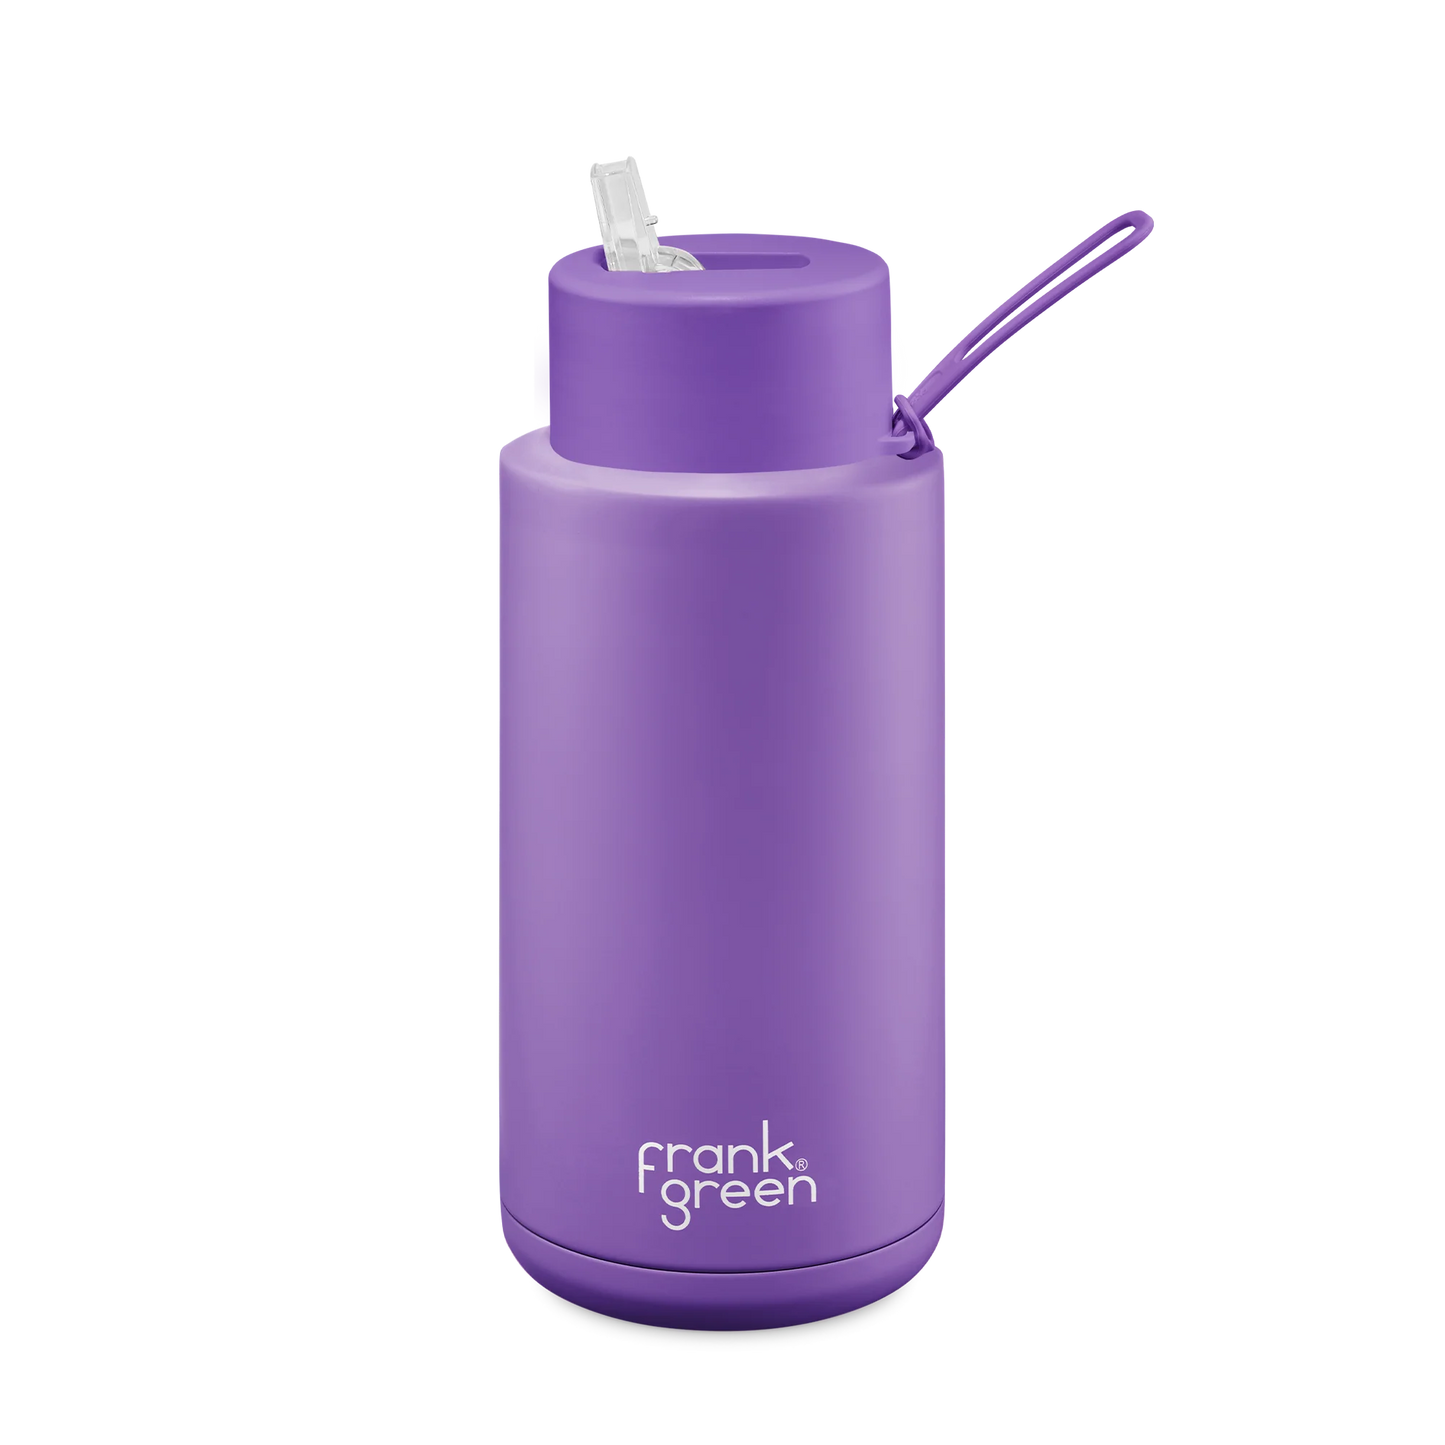 Frank Green Cosmic Purple Ceramic Reusable Bottle 1L With Straw Lid